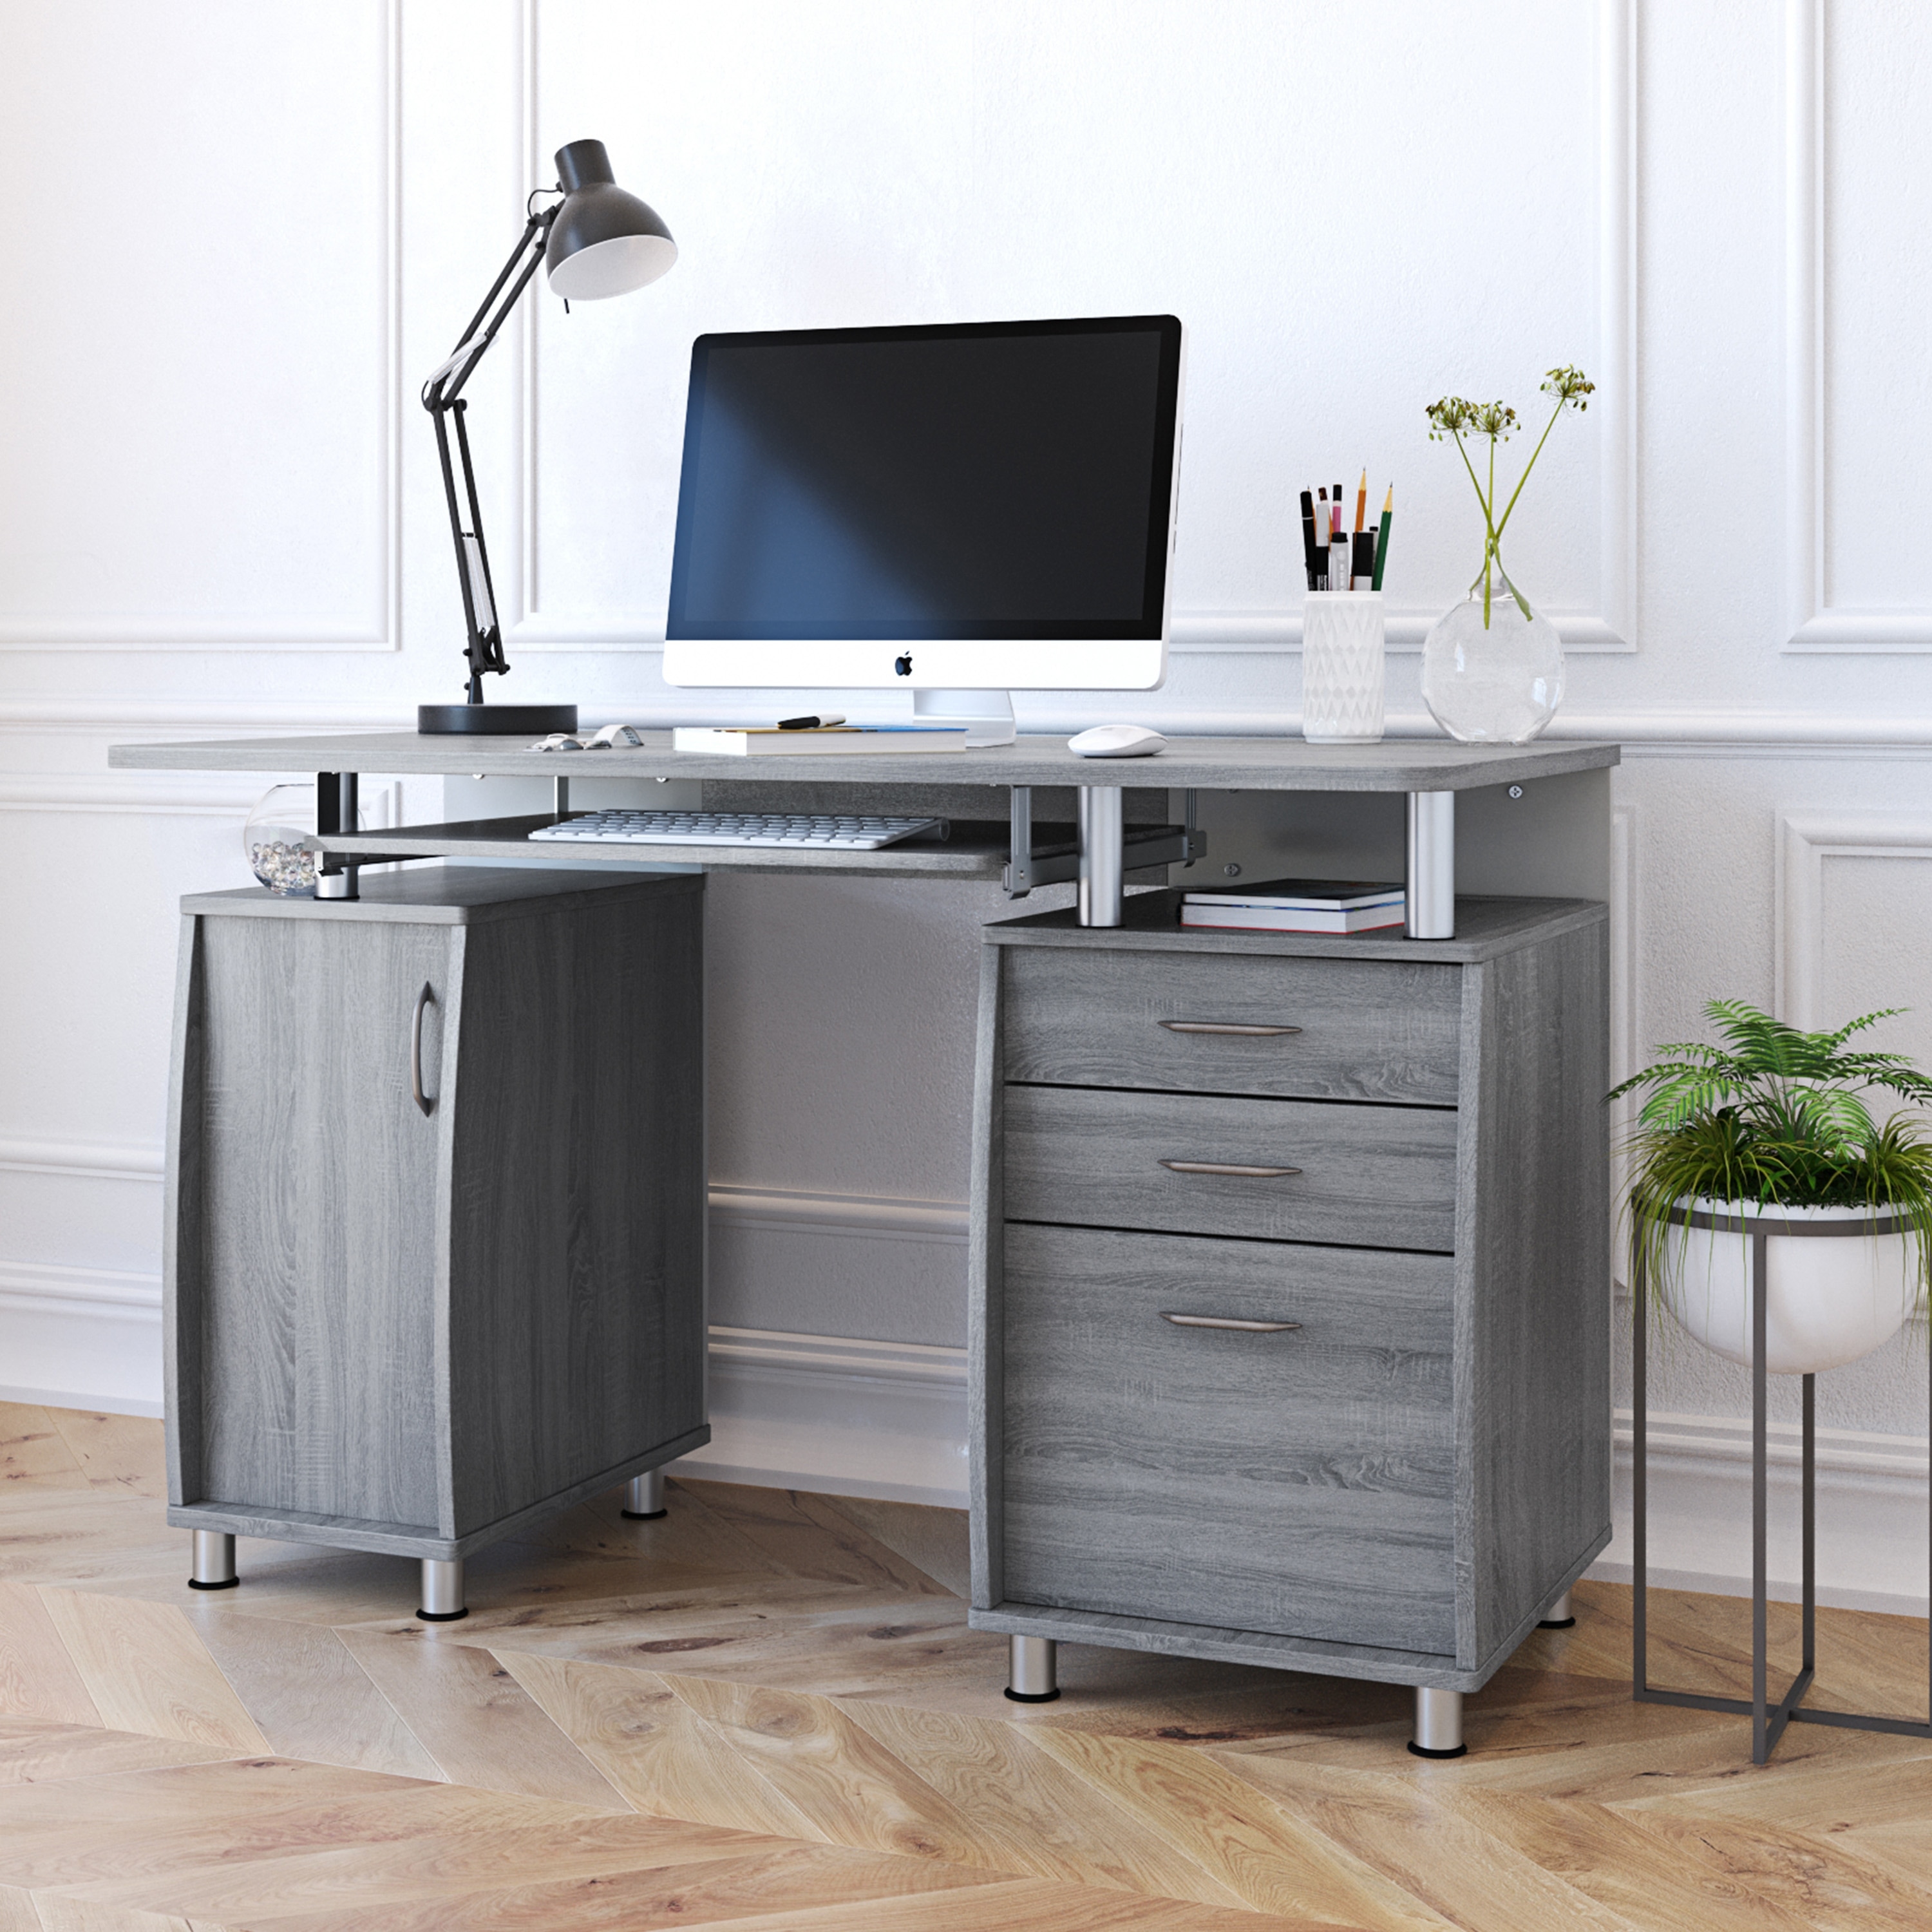 https://ak1.ostkcdn.com/images/products/is/images/direct/74b03e59aa901a2d9765dd598d2a04826cc45db7/Techni-Mobili-Complete-Workstation-Computer-Desk-with-Storage.jpg